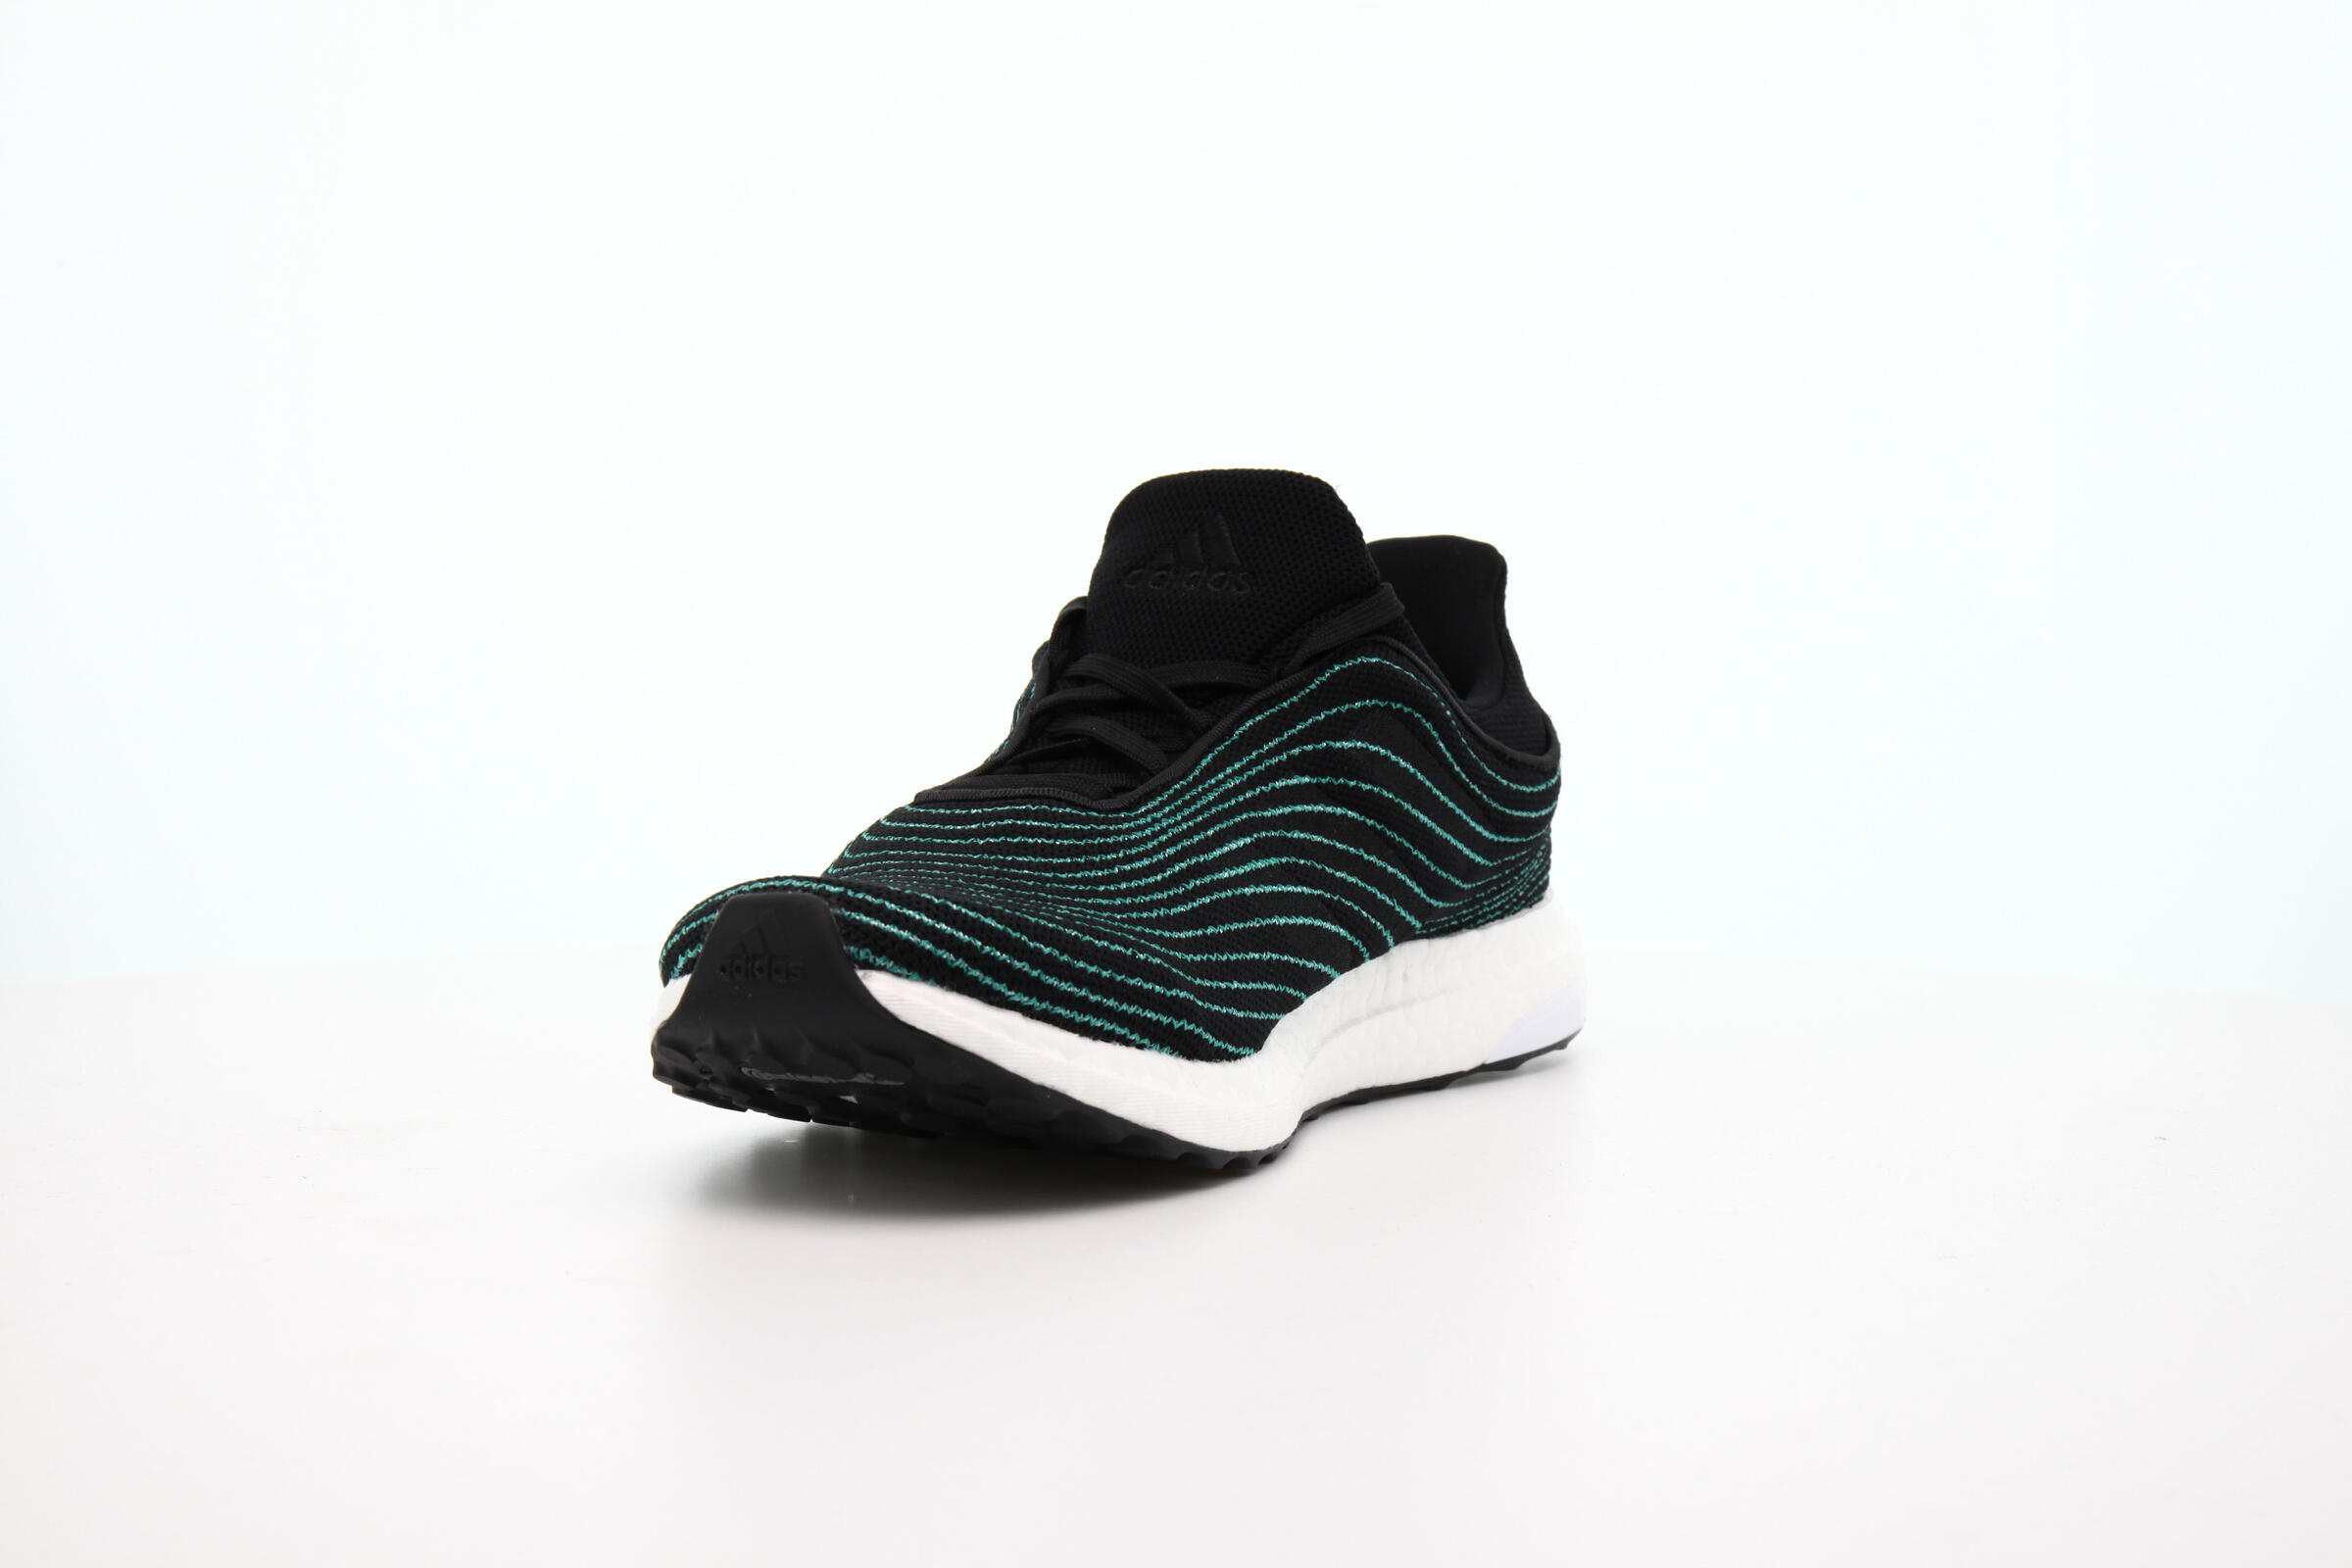 adidas Performance ULTRABOOST PARLEY UNCAGED "CORE BLACK"